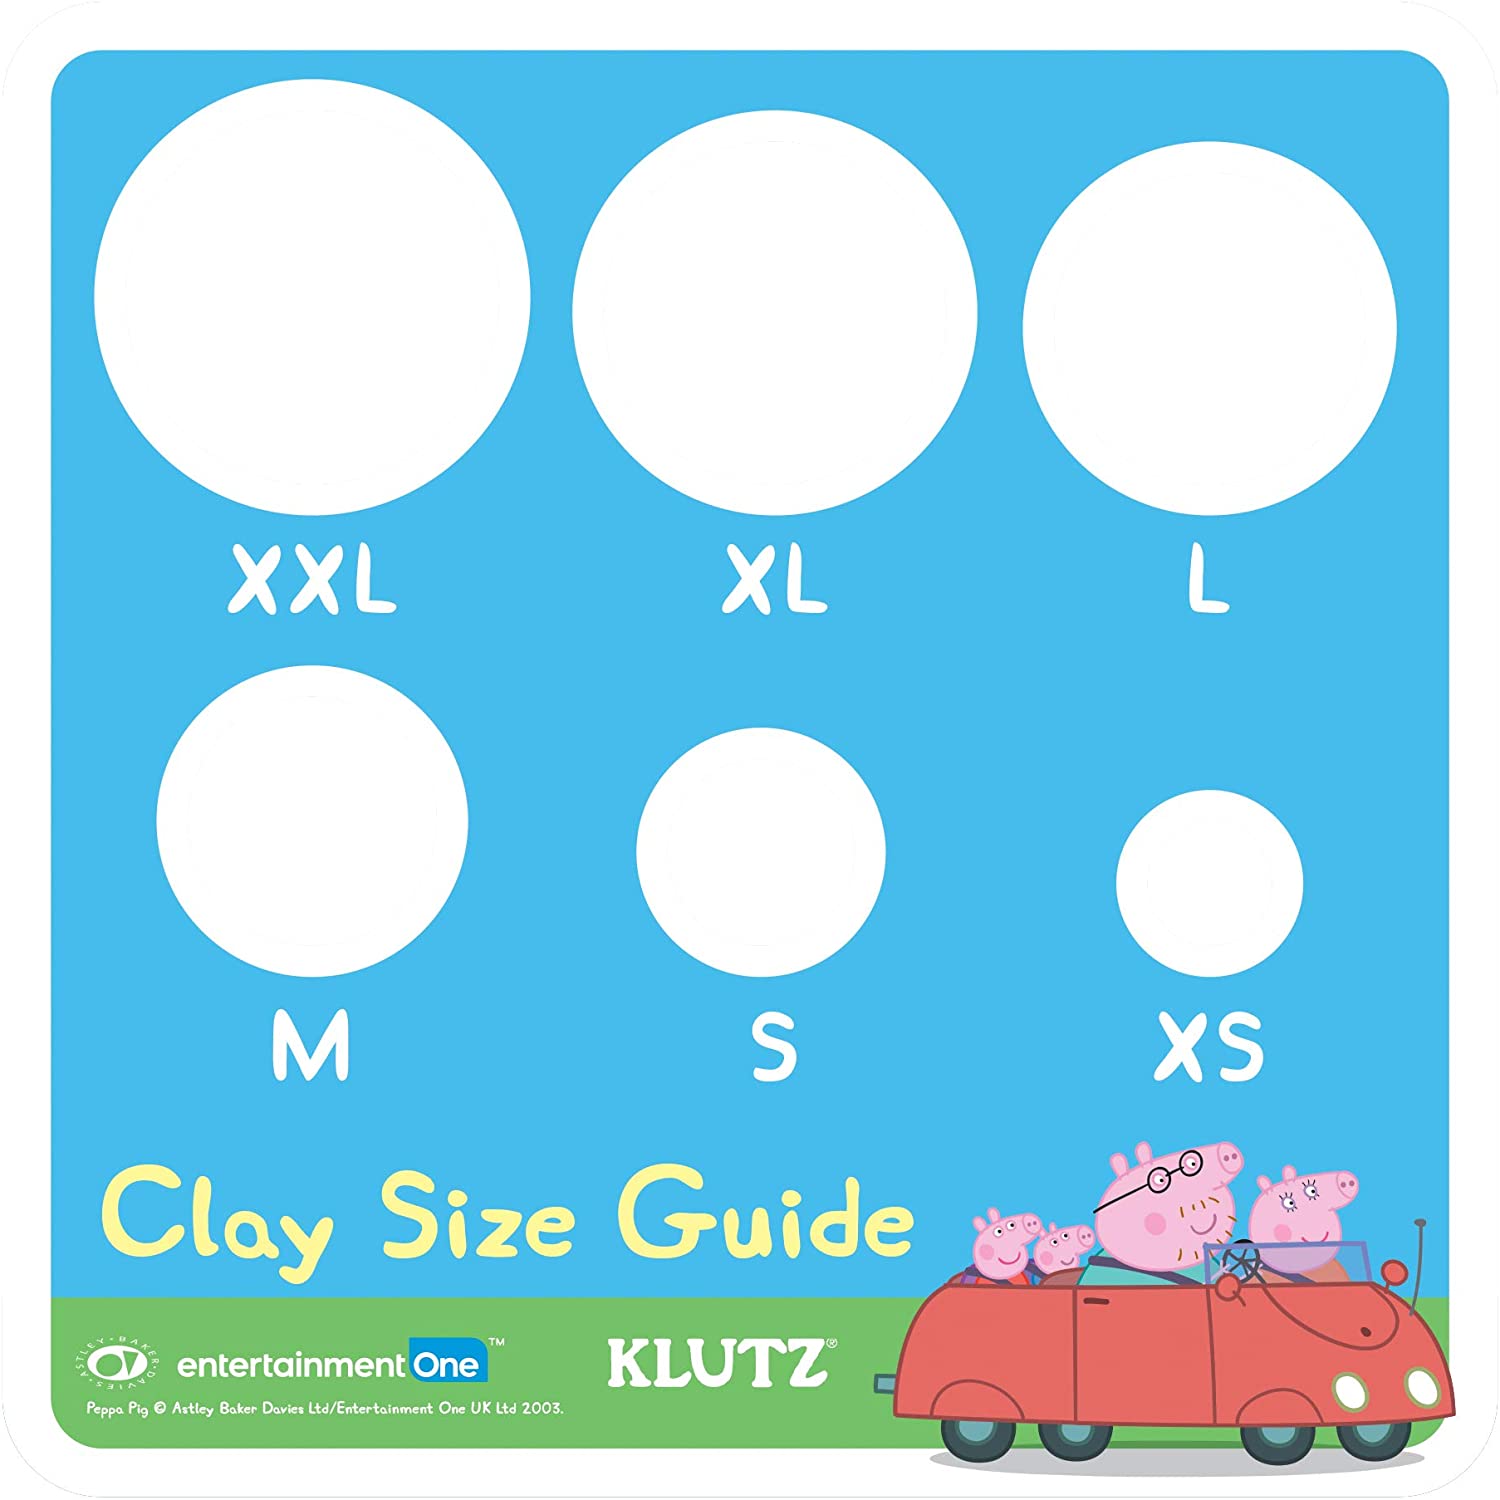 Kids Love Getting Creative with Klutz Jr. Craft Kits - Mommy Kat and Kids